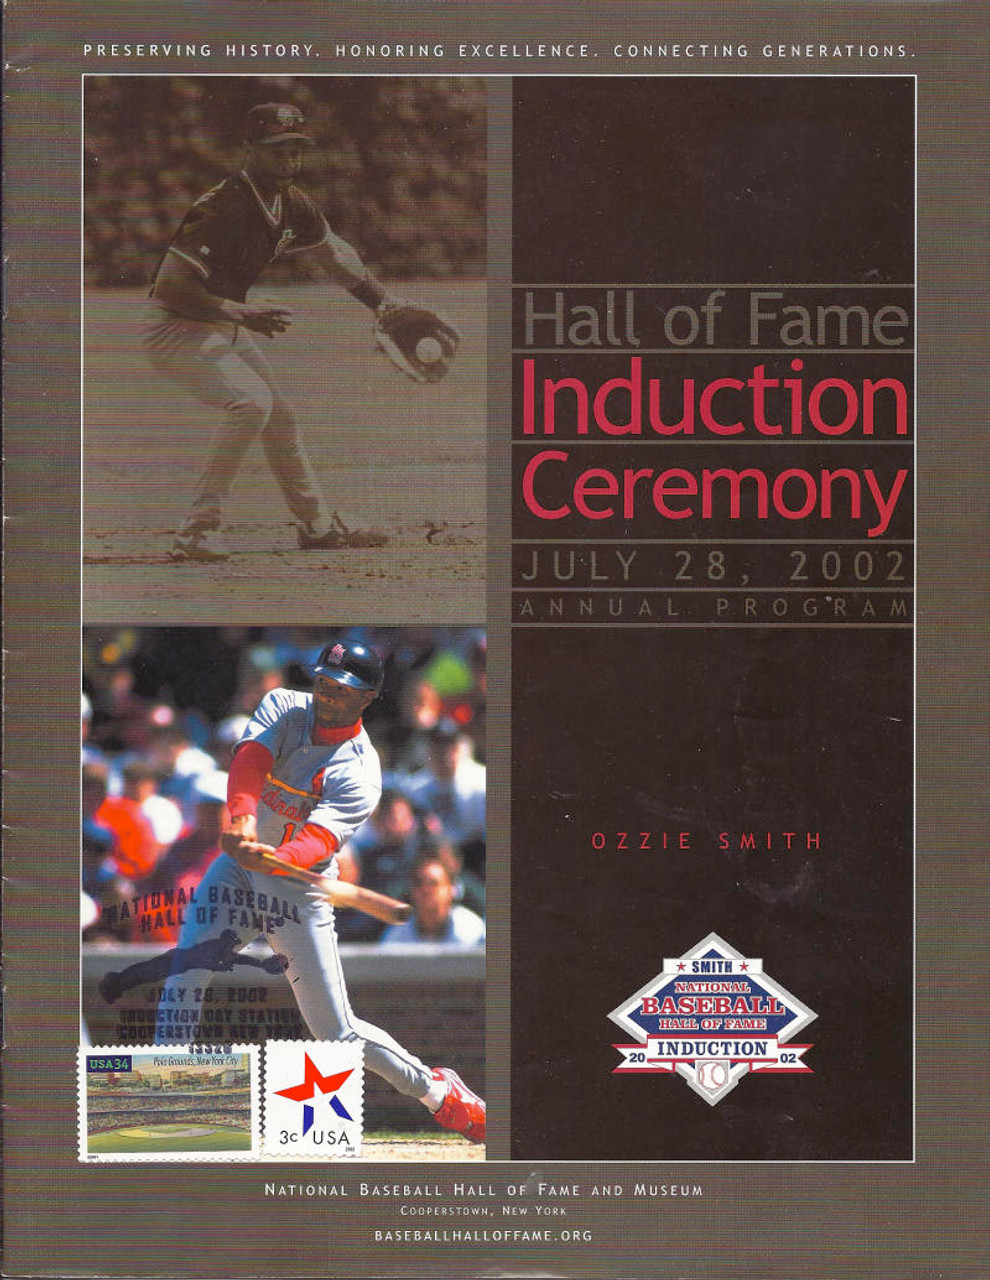 Details about   2002 Ozzie Smith HOF Plaque Postcard Cancelled on Induction Day 7/28/02 